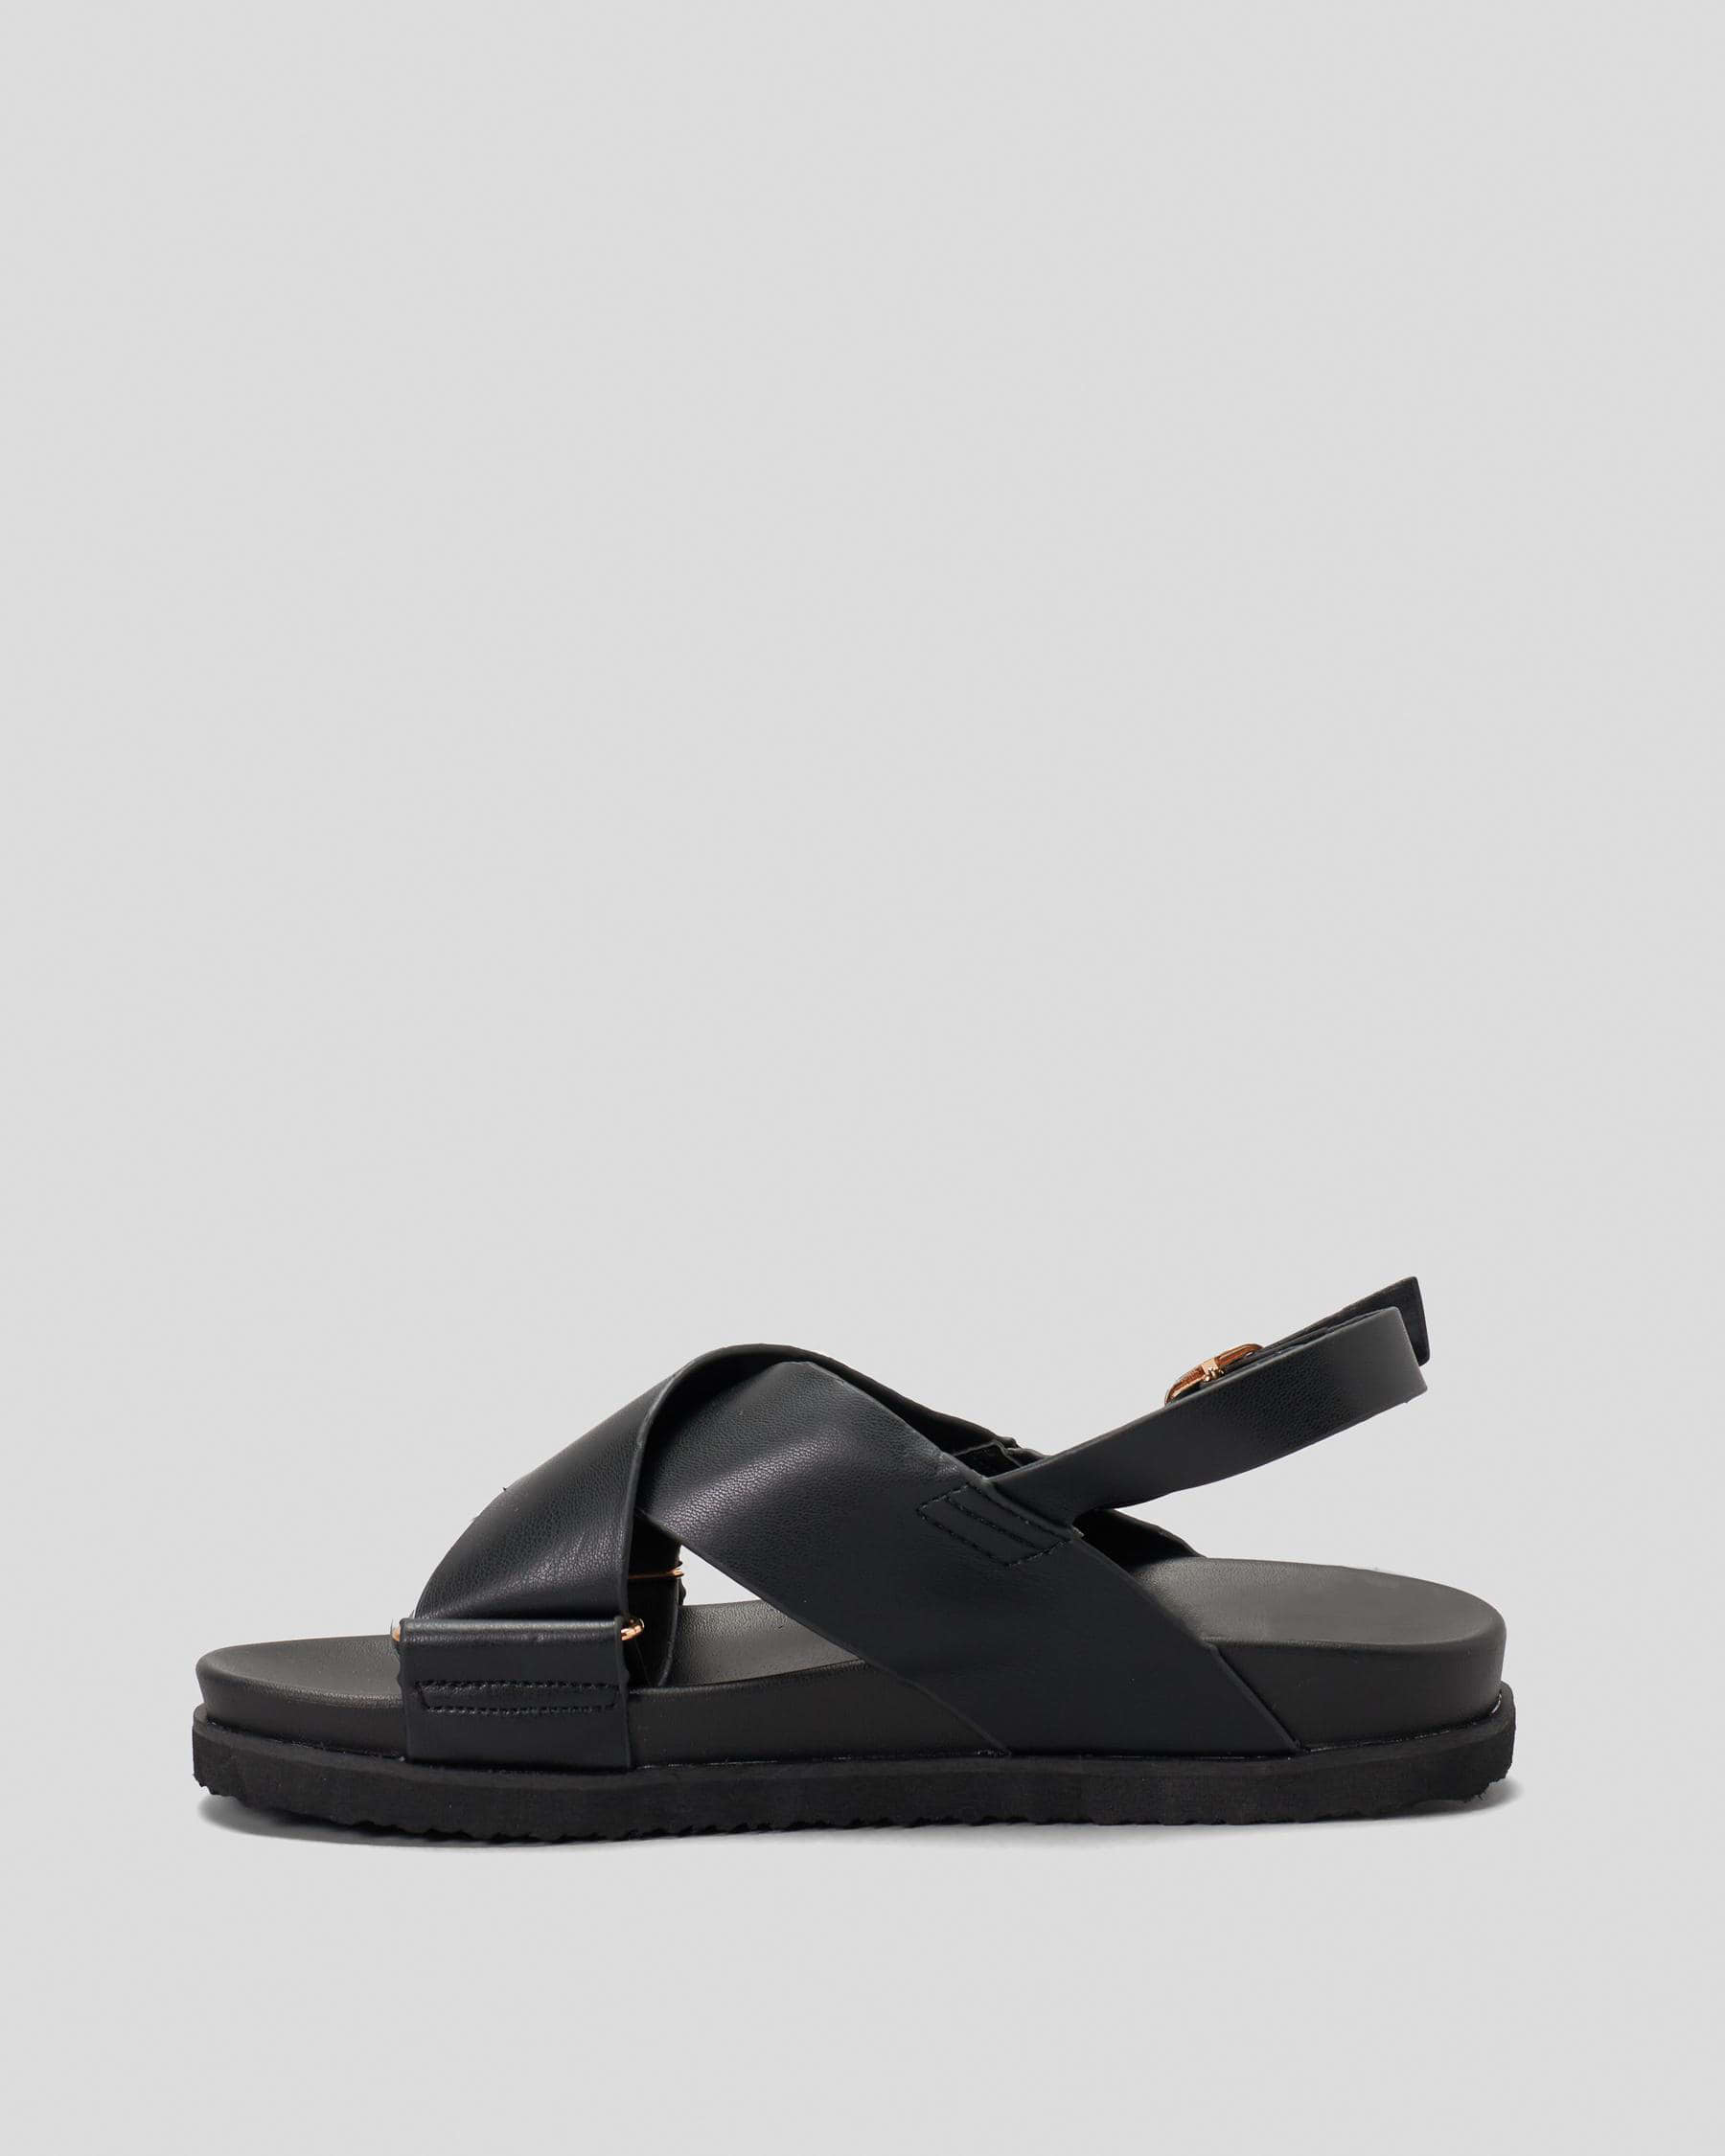 Ava And Ever Myra Sandals In Black/black - Fast Shipping & Easy Returns ...